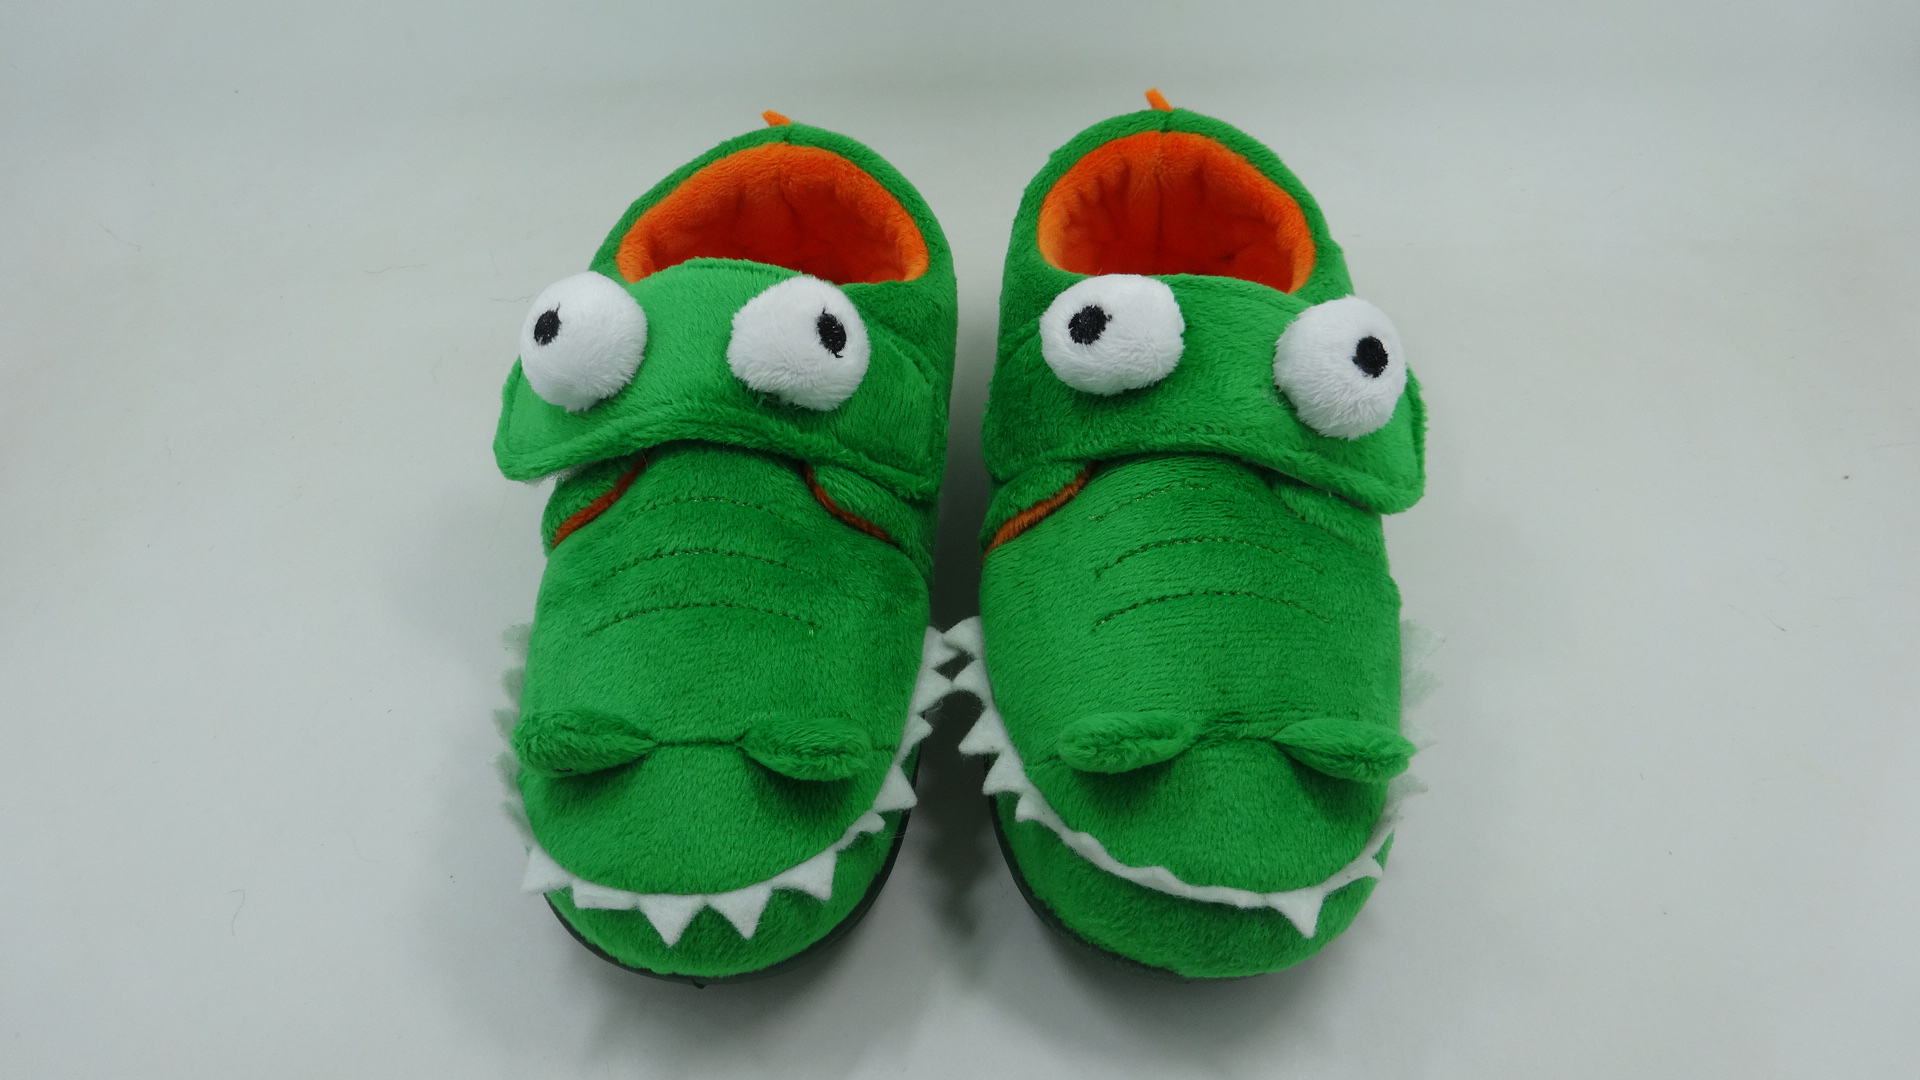 Girls' Boys' Home Slippers Warm Crocodile  House Slippers For Kids Super Terry Lined Winter Indoor shoes 